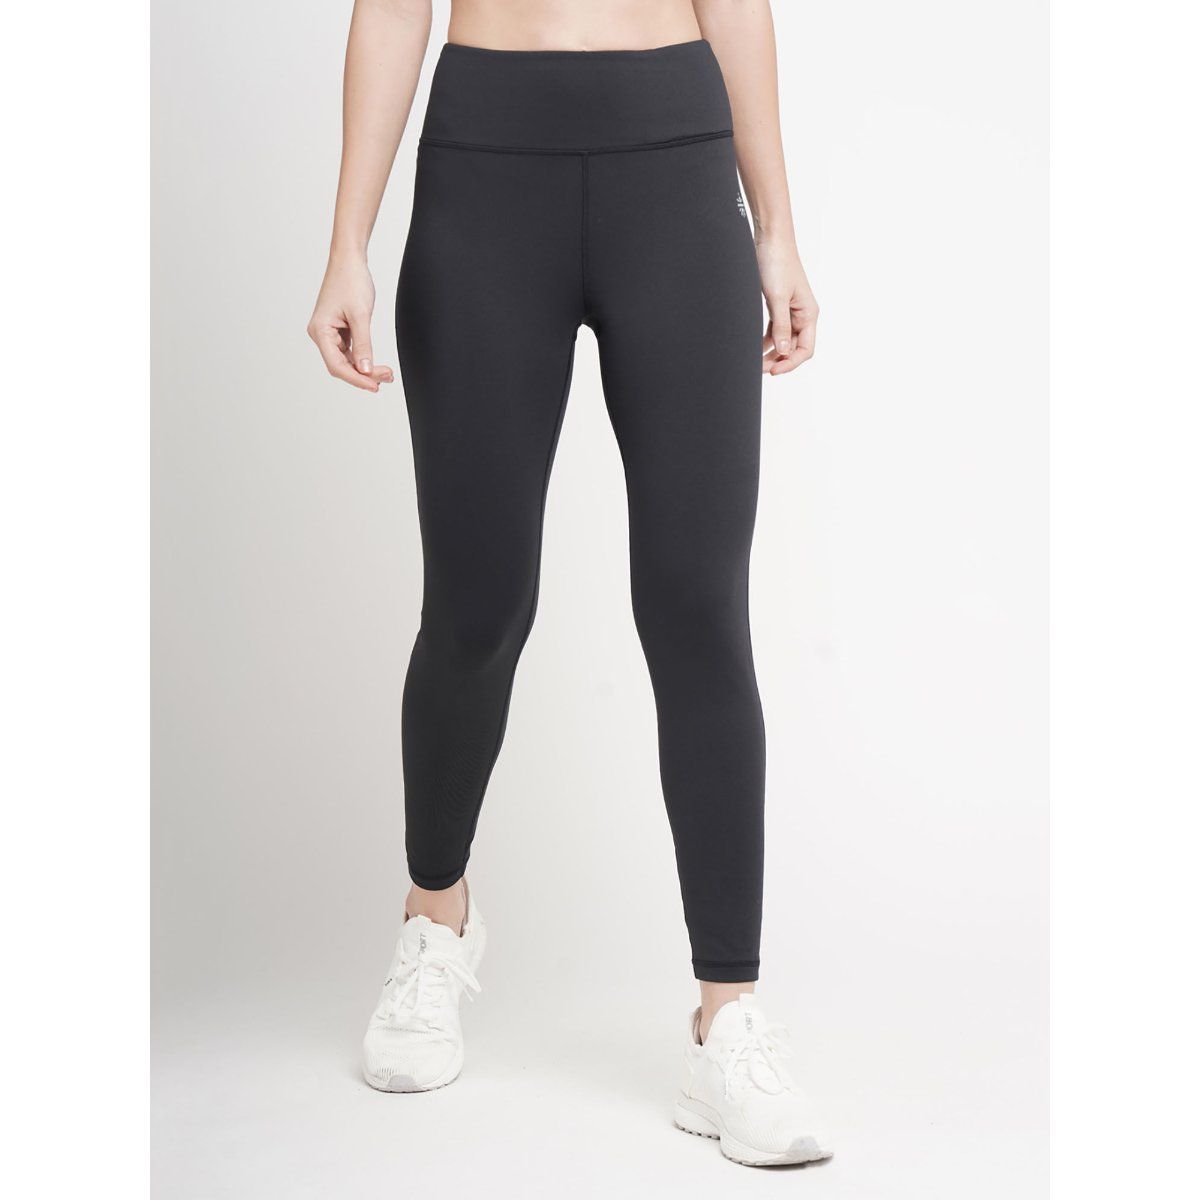 Buy Neu Look Gym wear Leggings Workout Tights Ankle Length Stretchable  Sports Leggings | Sports Fitness Yoga Track Pants for Girls Women Online In  India At Discounted Prices